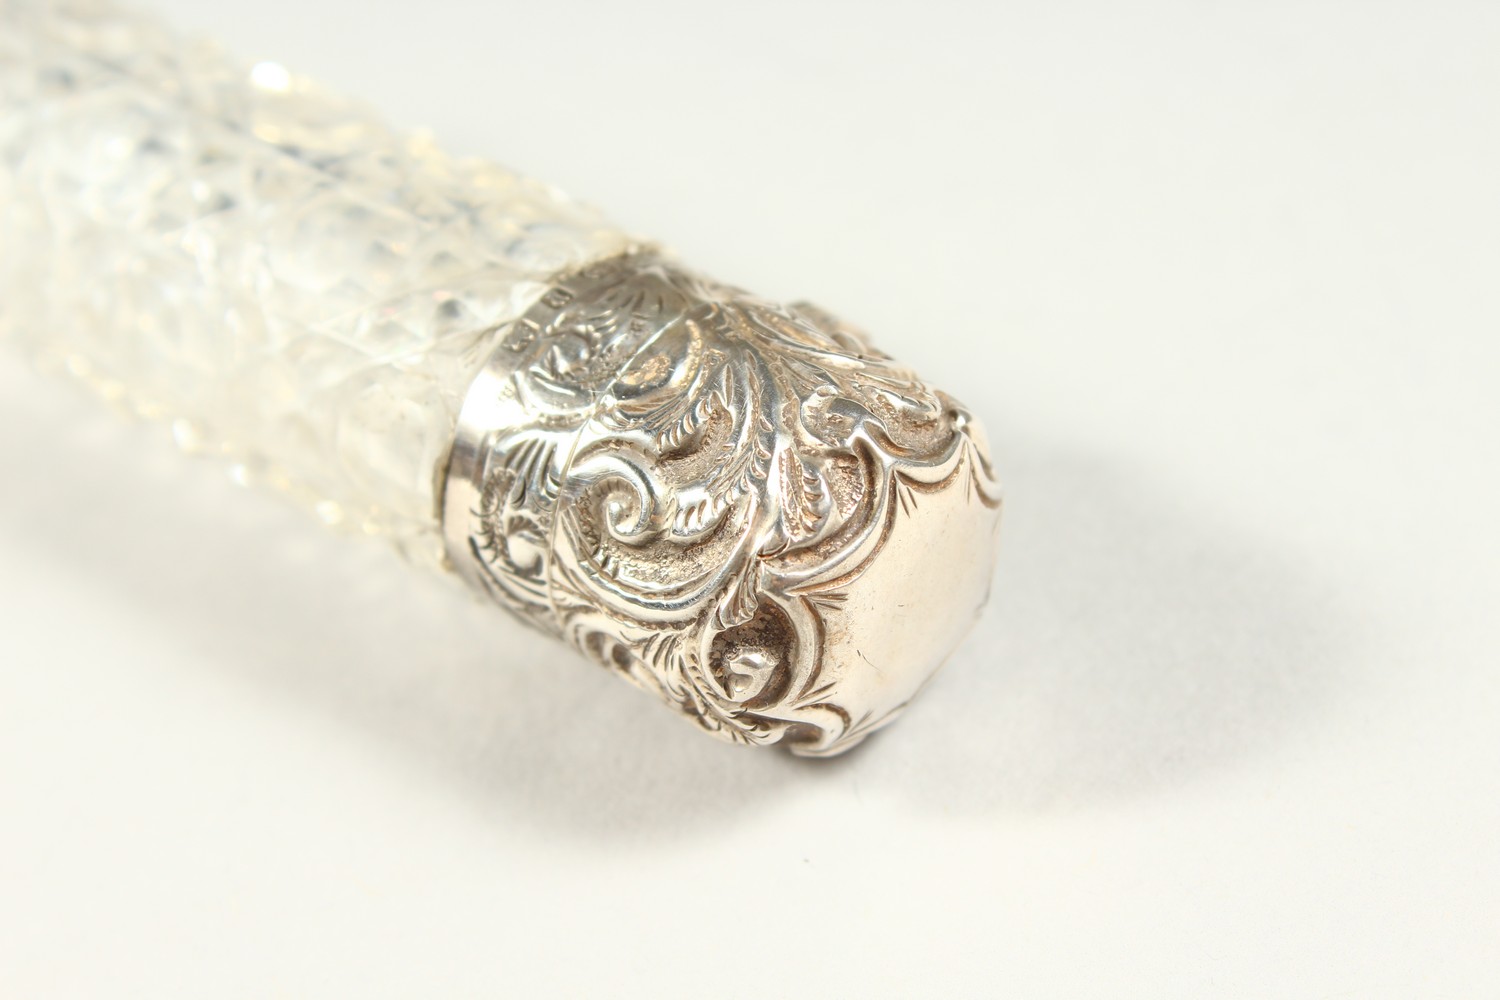 A VICTORIAN PLAIN CUT GLASS SCENT BOTTLE with repousse silver top and plain glass stopper. - Image 6 of 10